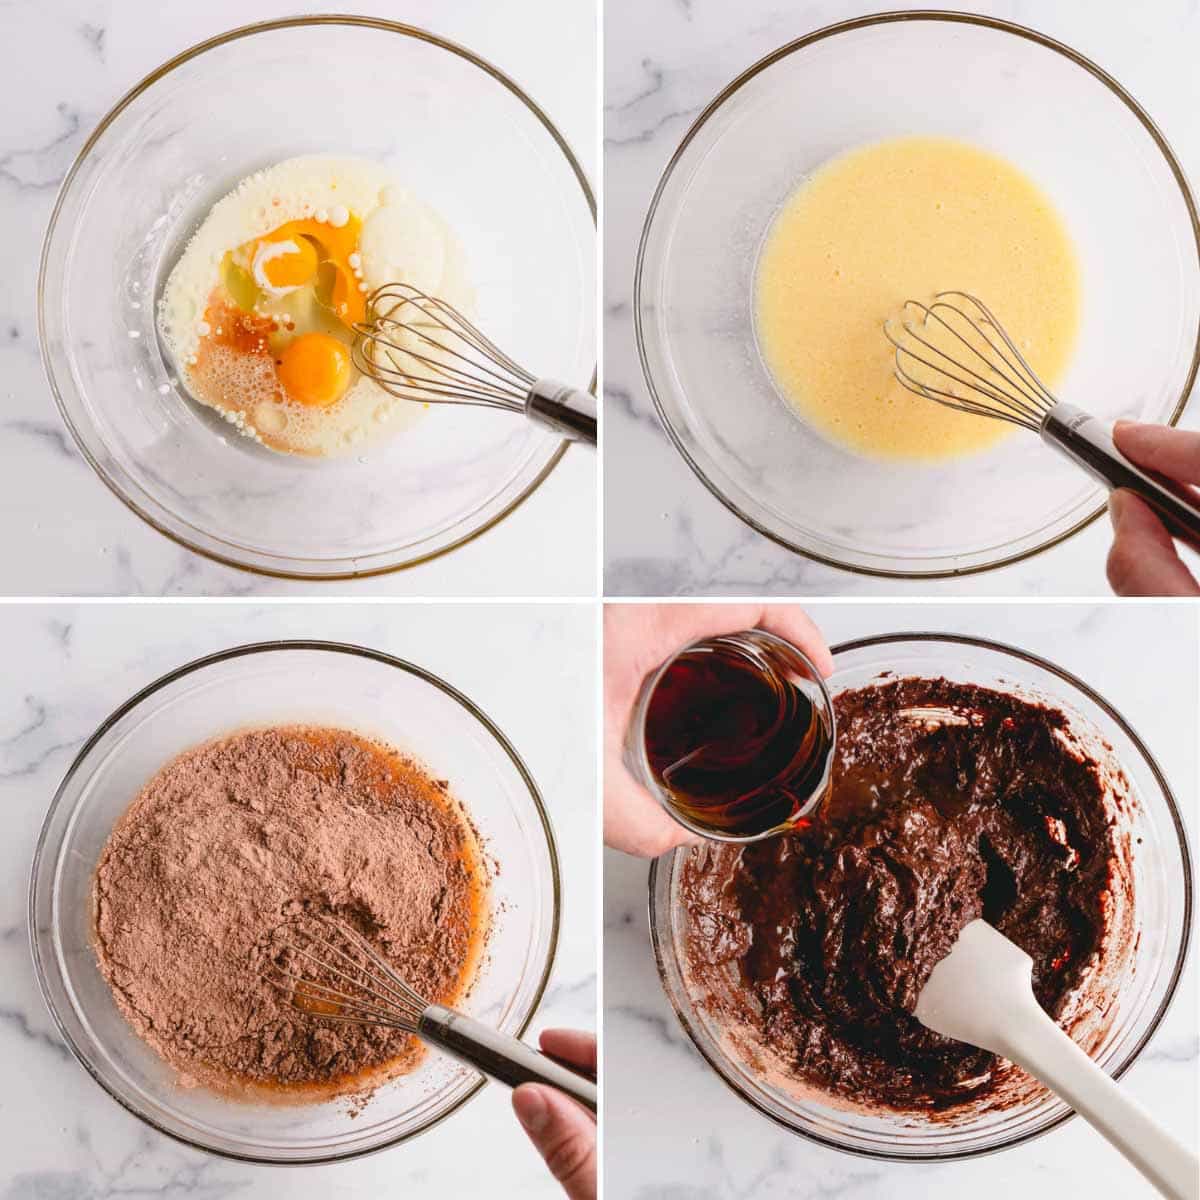 Four images showing the process of mixing wet and dry ingredients to form strawberry chocolate cupcake batter.